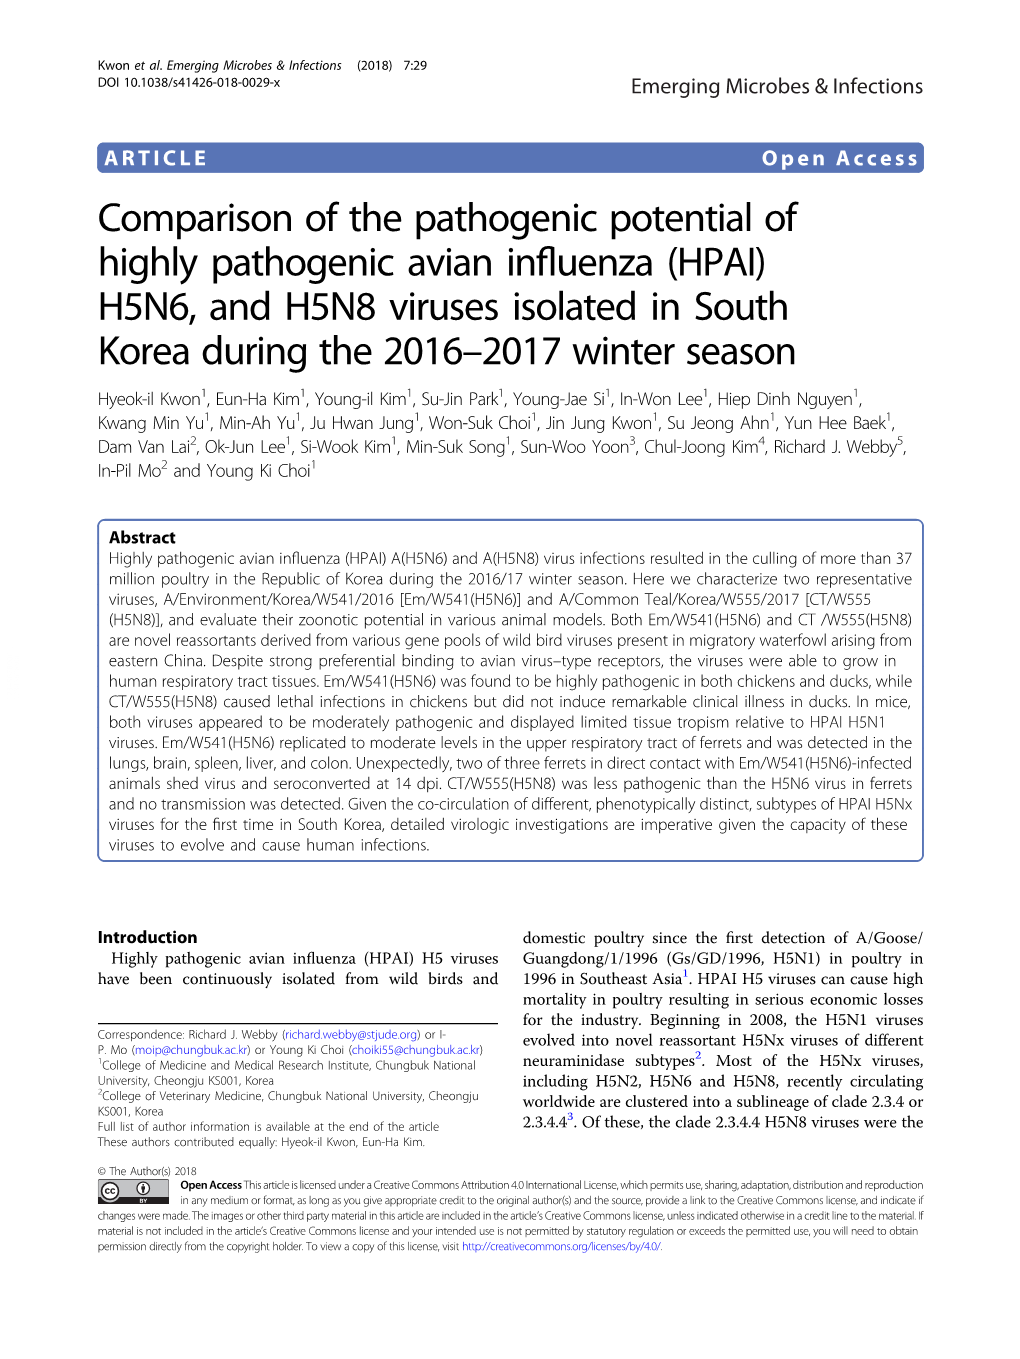 Comparison of the Pathogenic Potential of Highly Pathogenic Avian